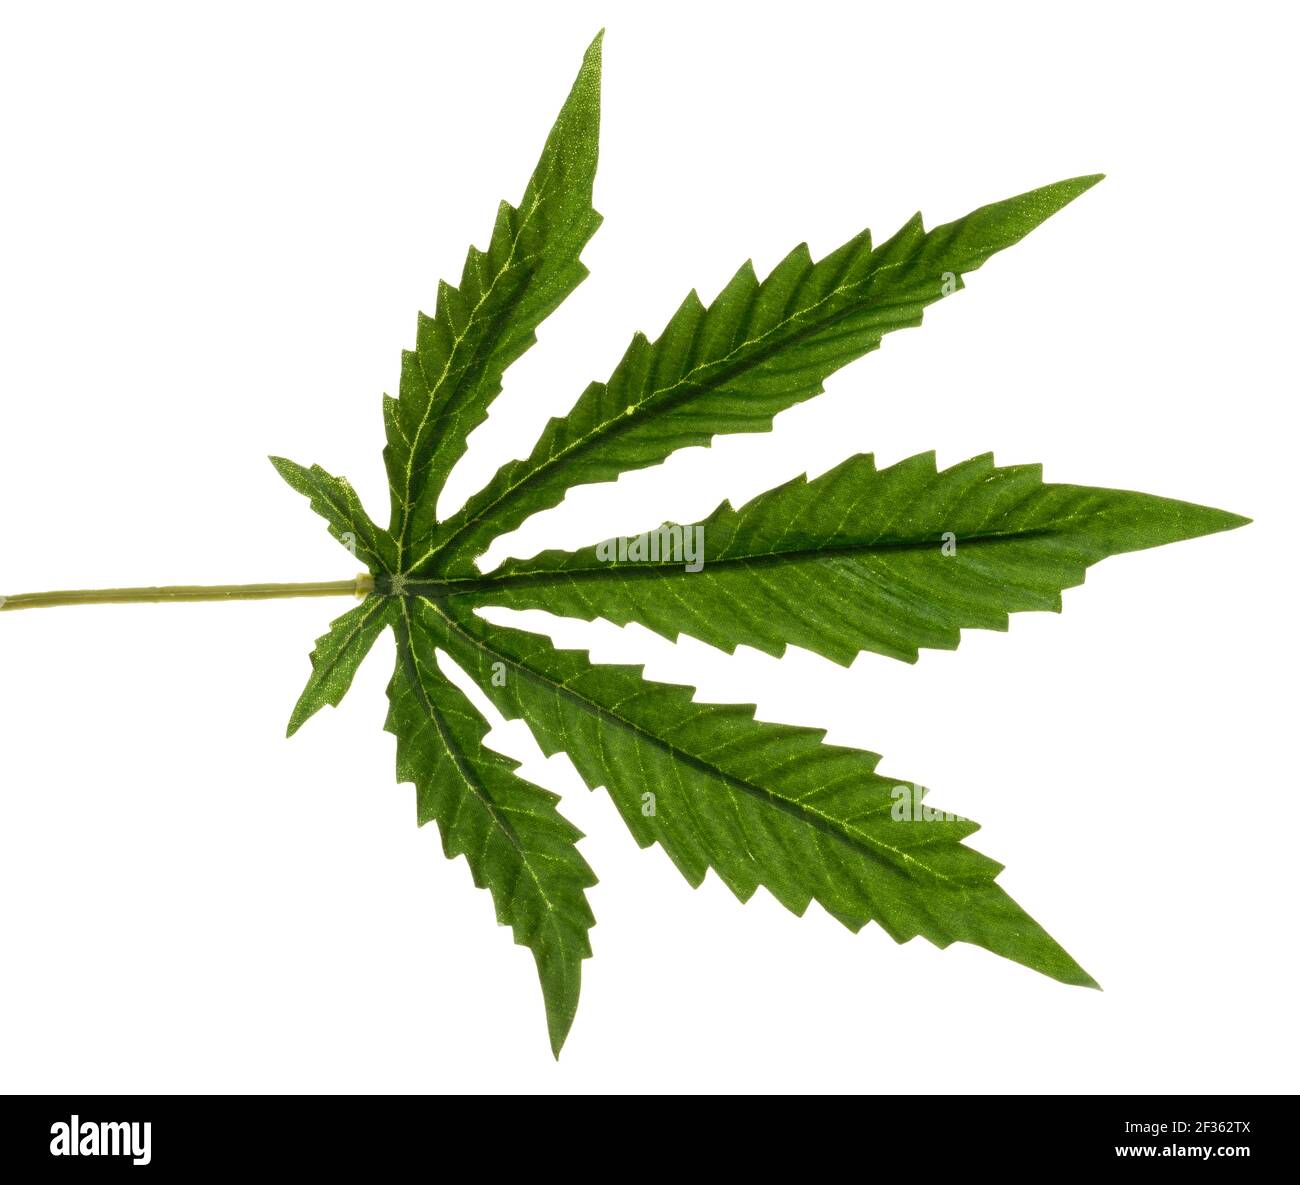 Very good fake cannabis leaves. Iconic shape of a cannabis plant leaf. Serrated edged green leaf. Stock Photo